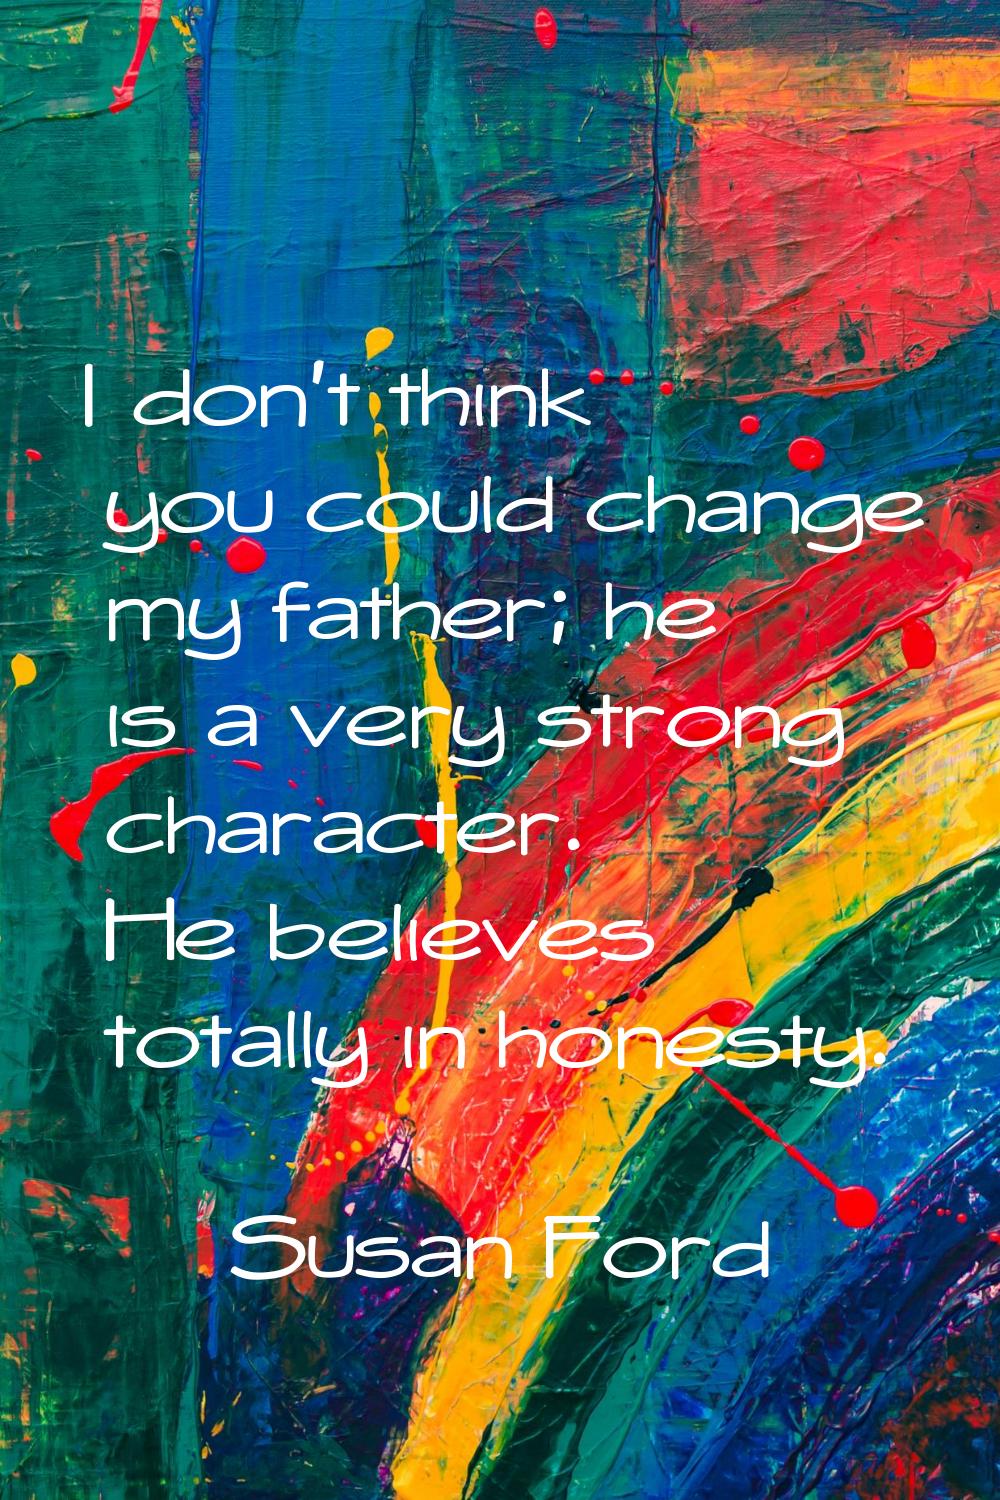 I don't think you could change my father; he is a very strong character. He believes totally in hon